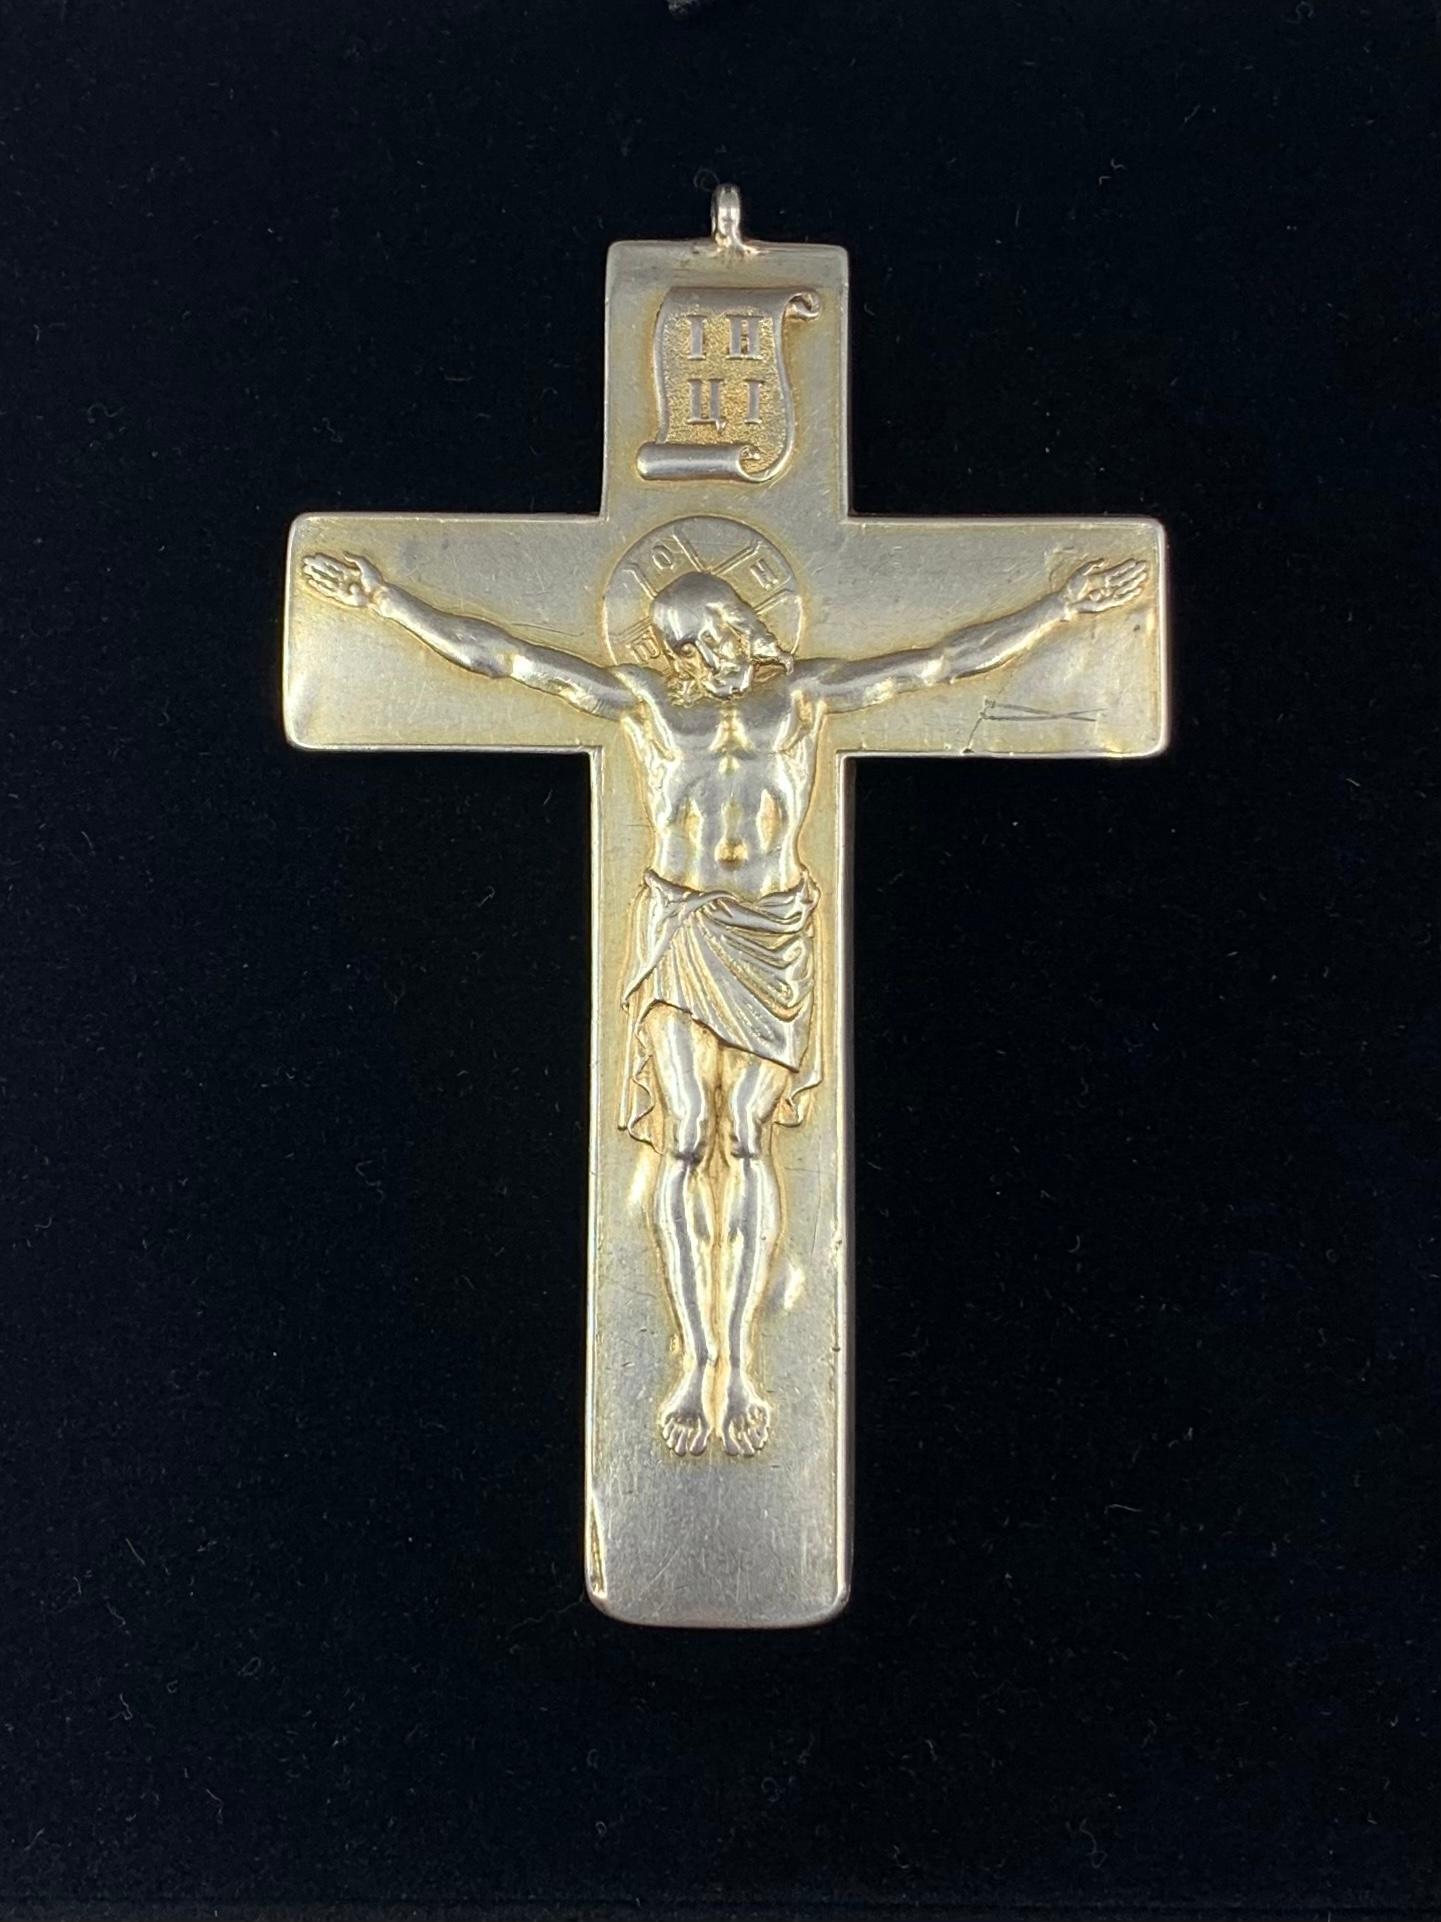 Rare, historically important antique Russian Imperial Tsar Paul I double sided gilded silver pectoral cross known as Pavlovsky Cross
19th Century
Tsar Paul I was the first Russian Tsar to establish the practice of awarding Russian Orthodox spiritual